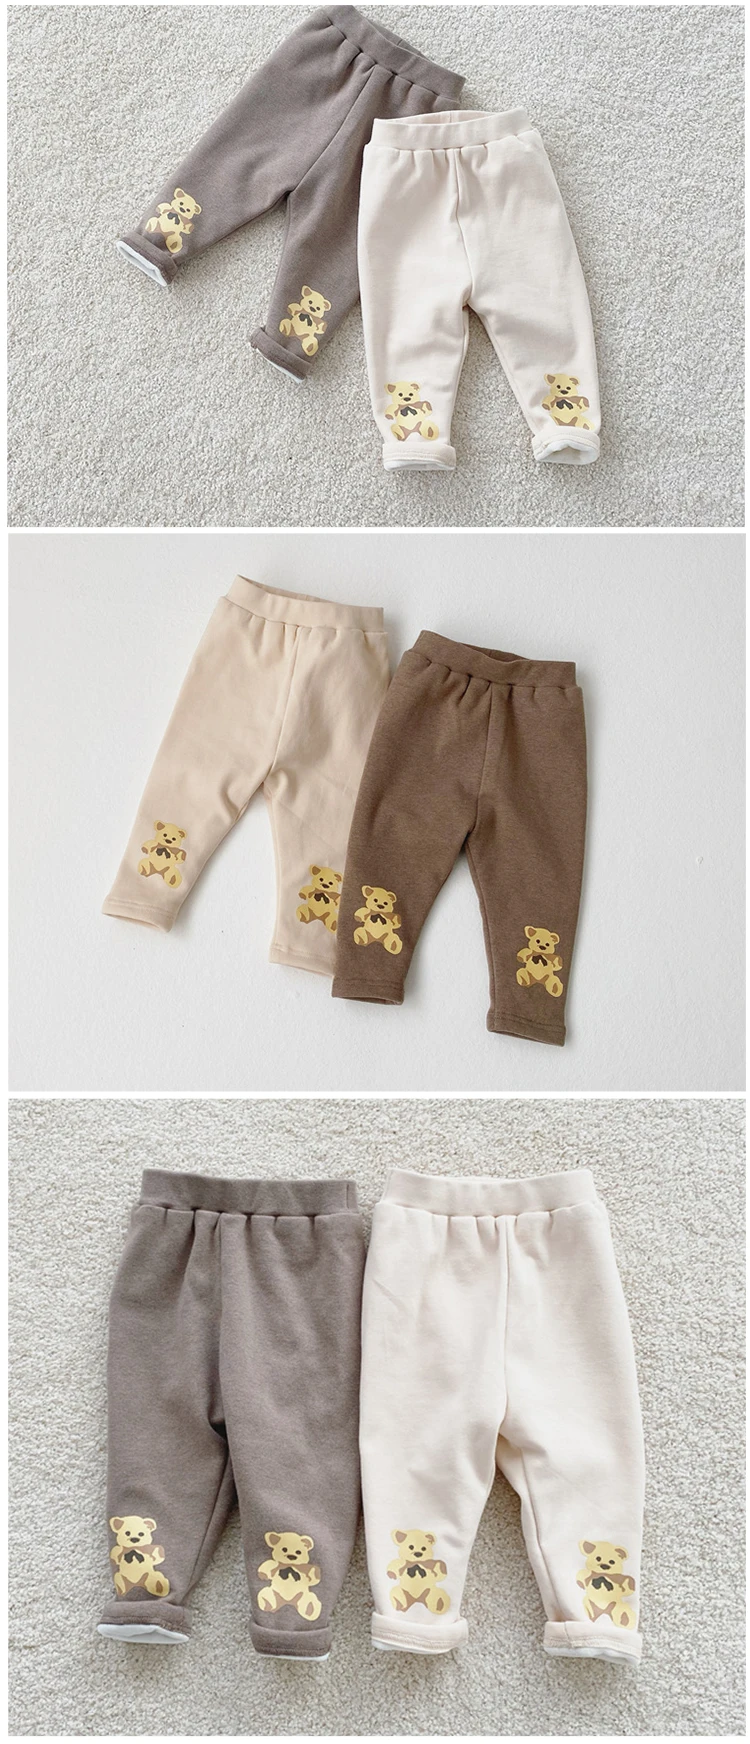 Hot sale winter baby double layer plush thickened leggings baby cute bear warm and comfortable pants 3985